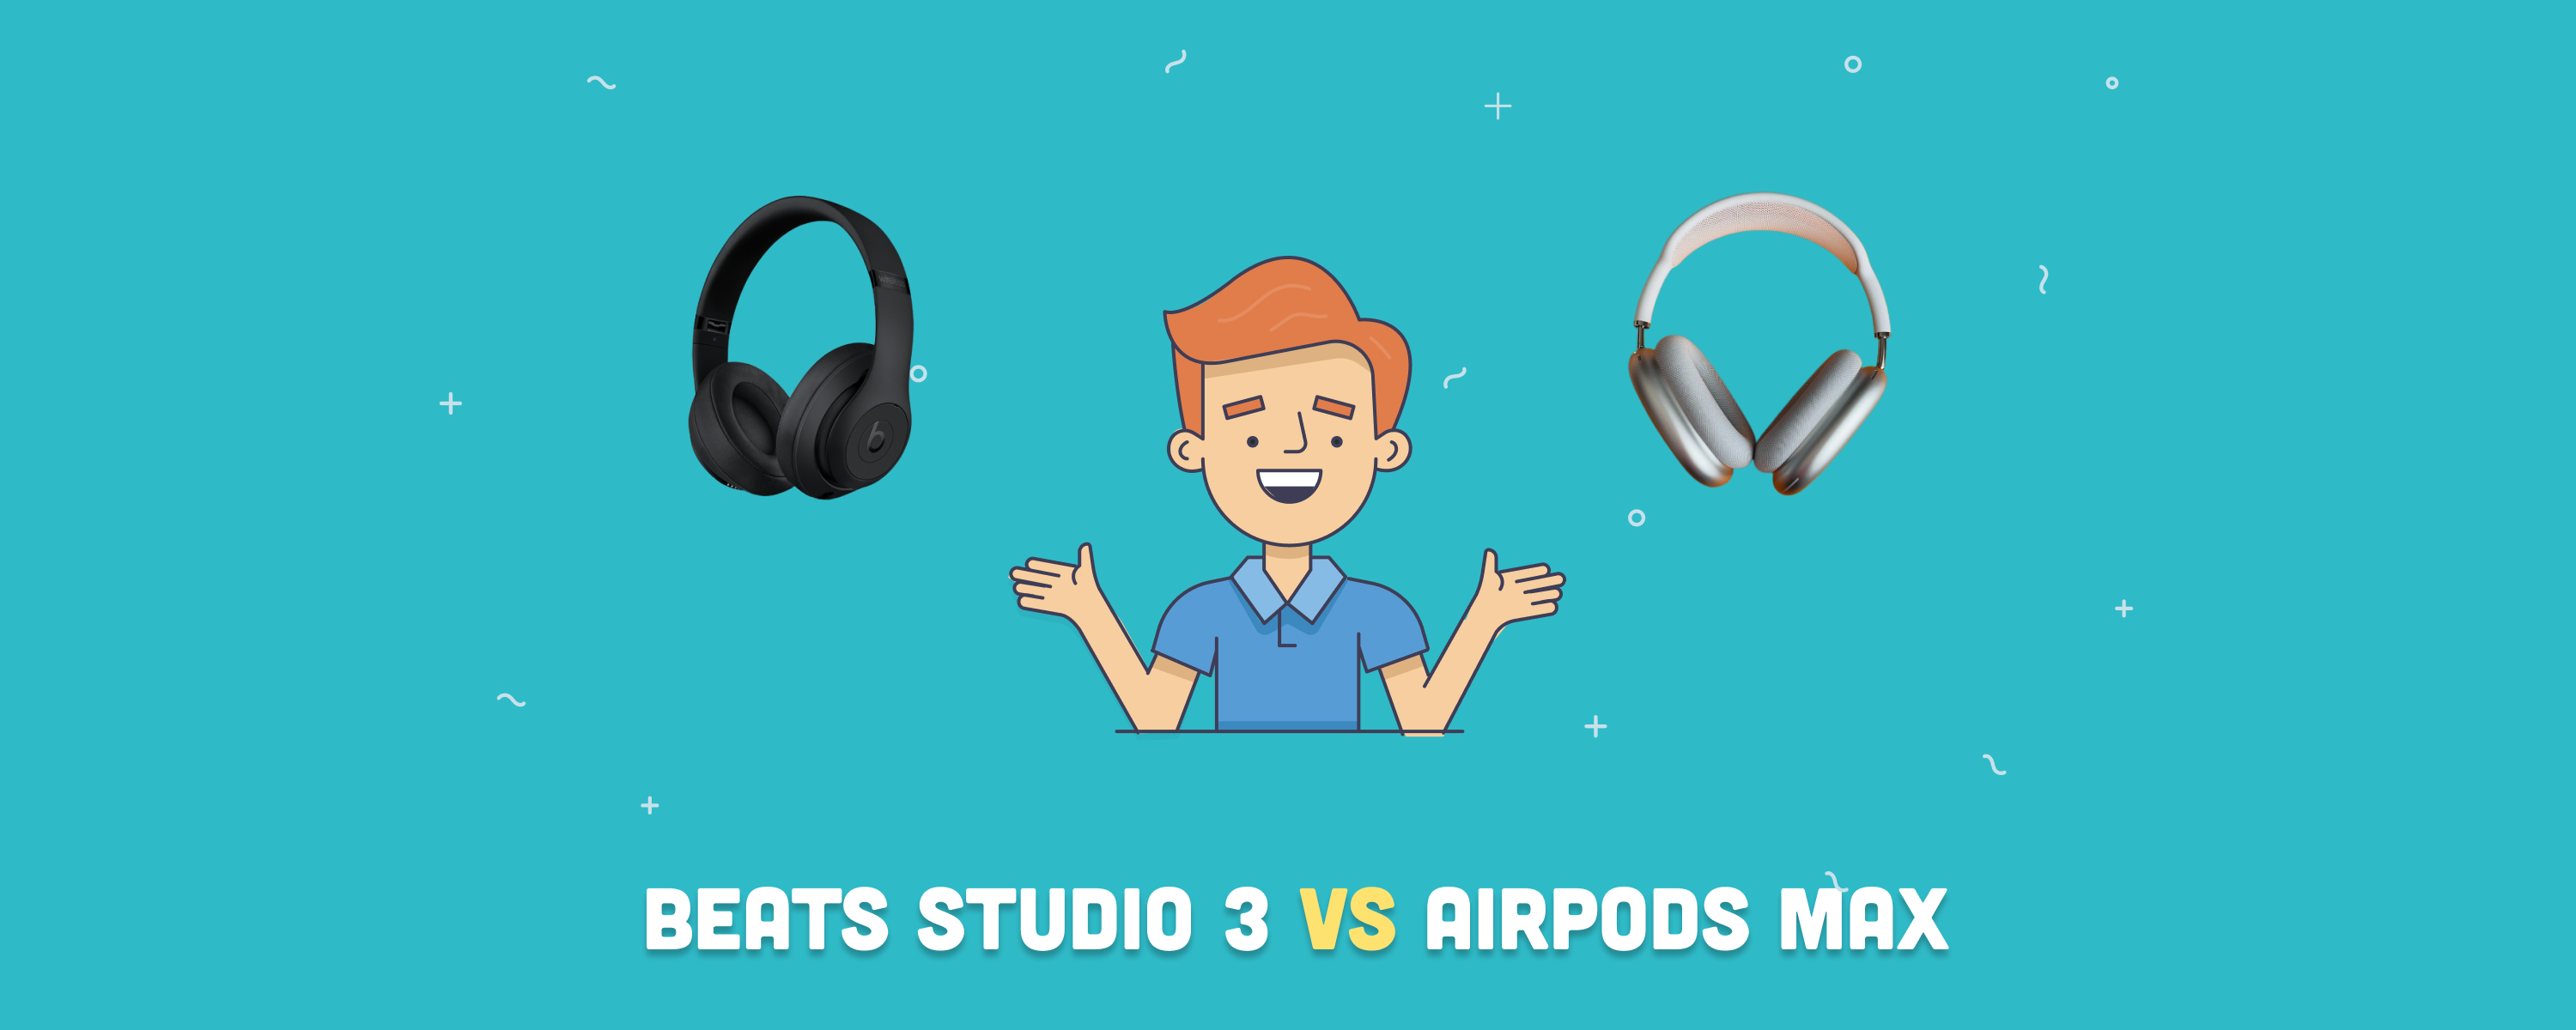 Beats Studio 3 vs. AirPods Max: A Guide to the Best Headphones